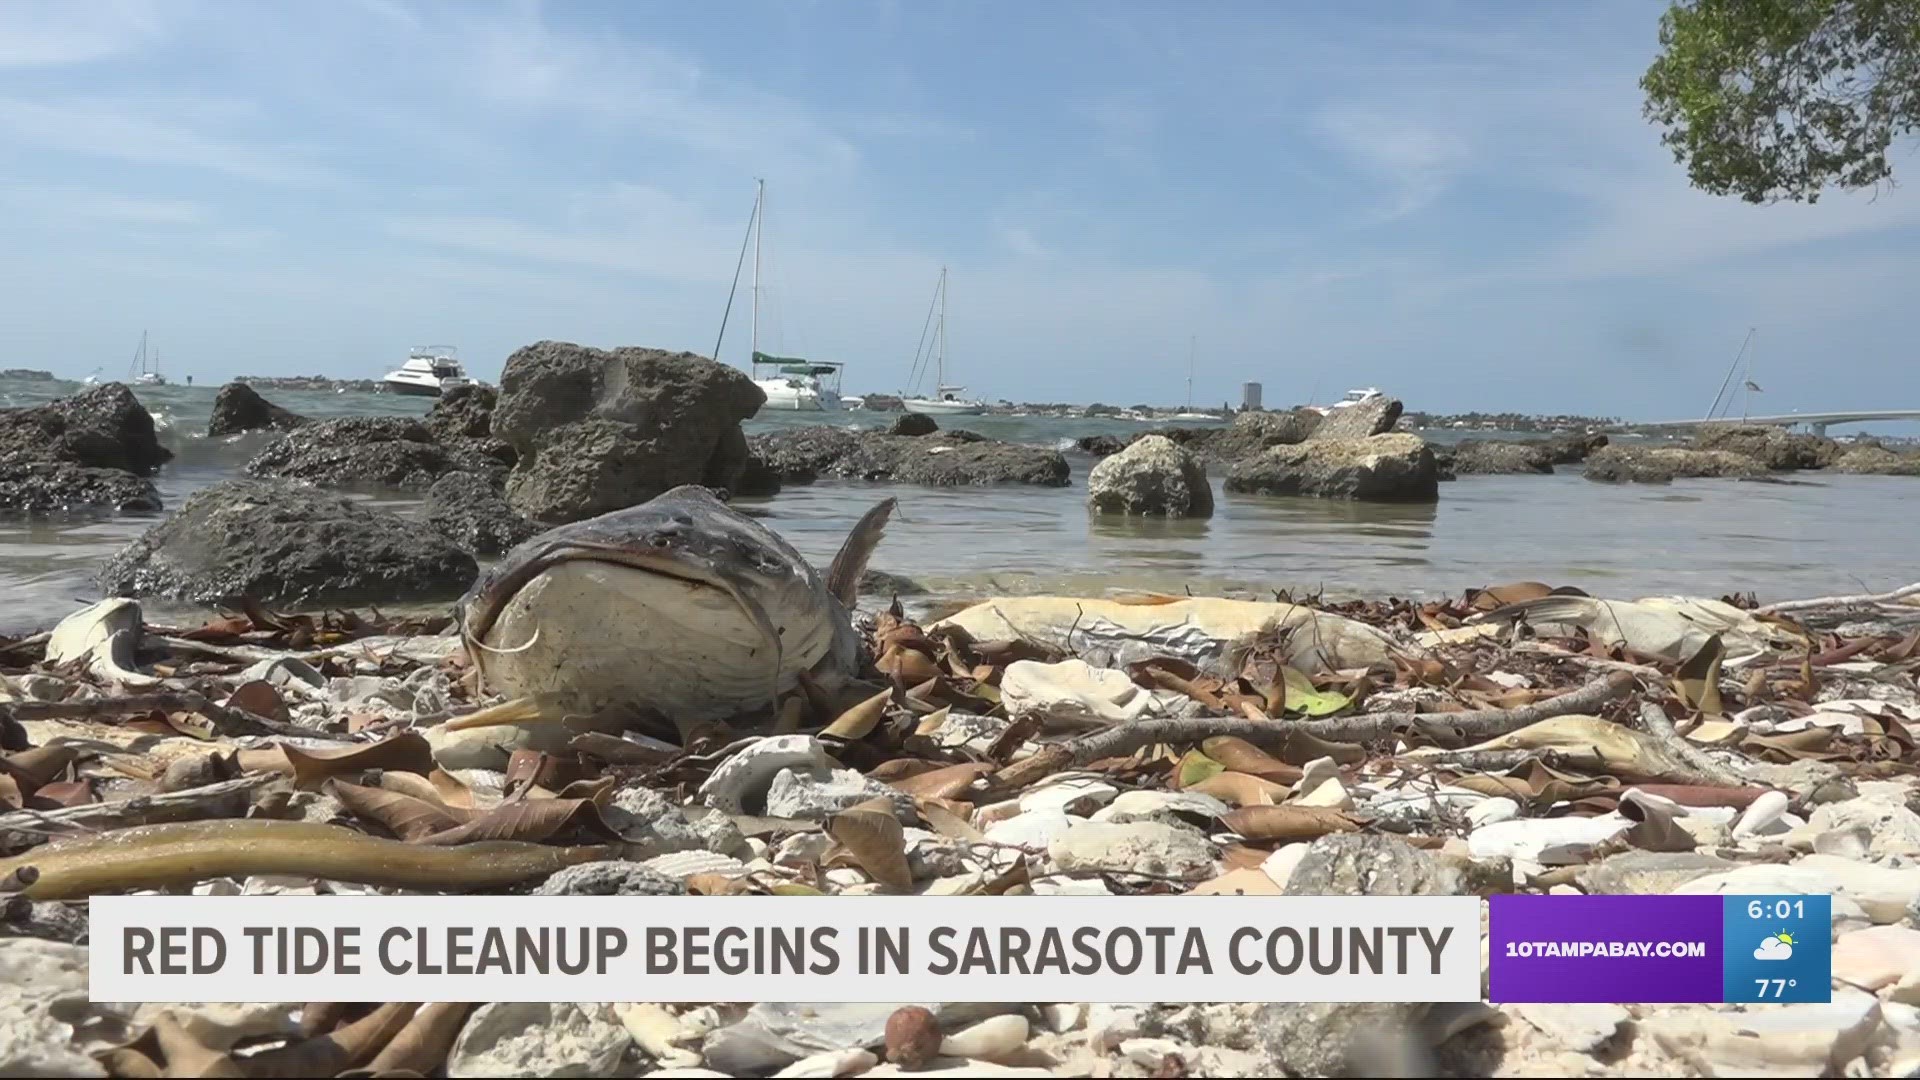 Reports of fish kill related to red tide have been received from Pasco, Pinellas, Manatee and Sarasota counties.